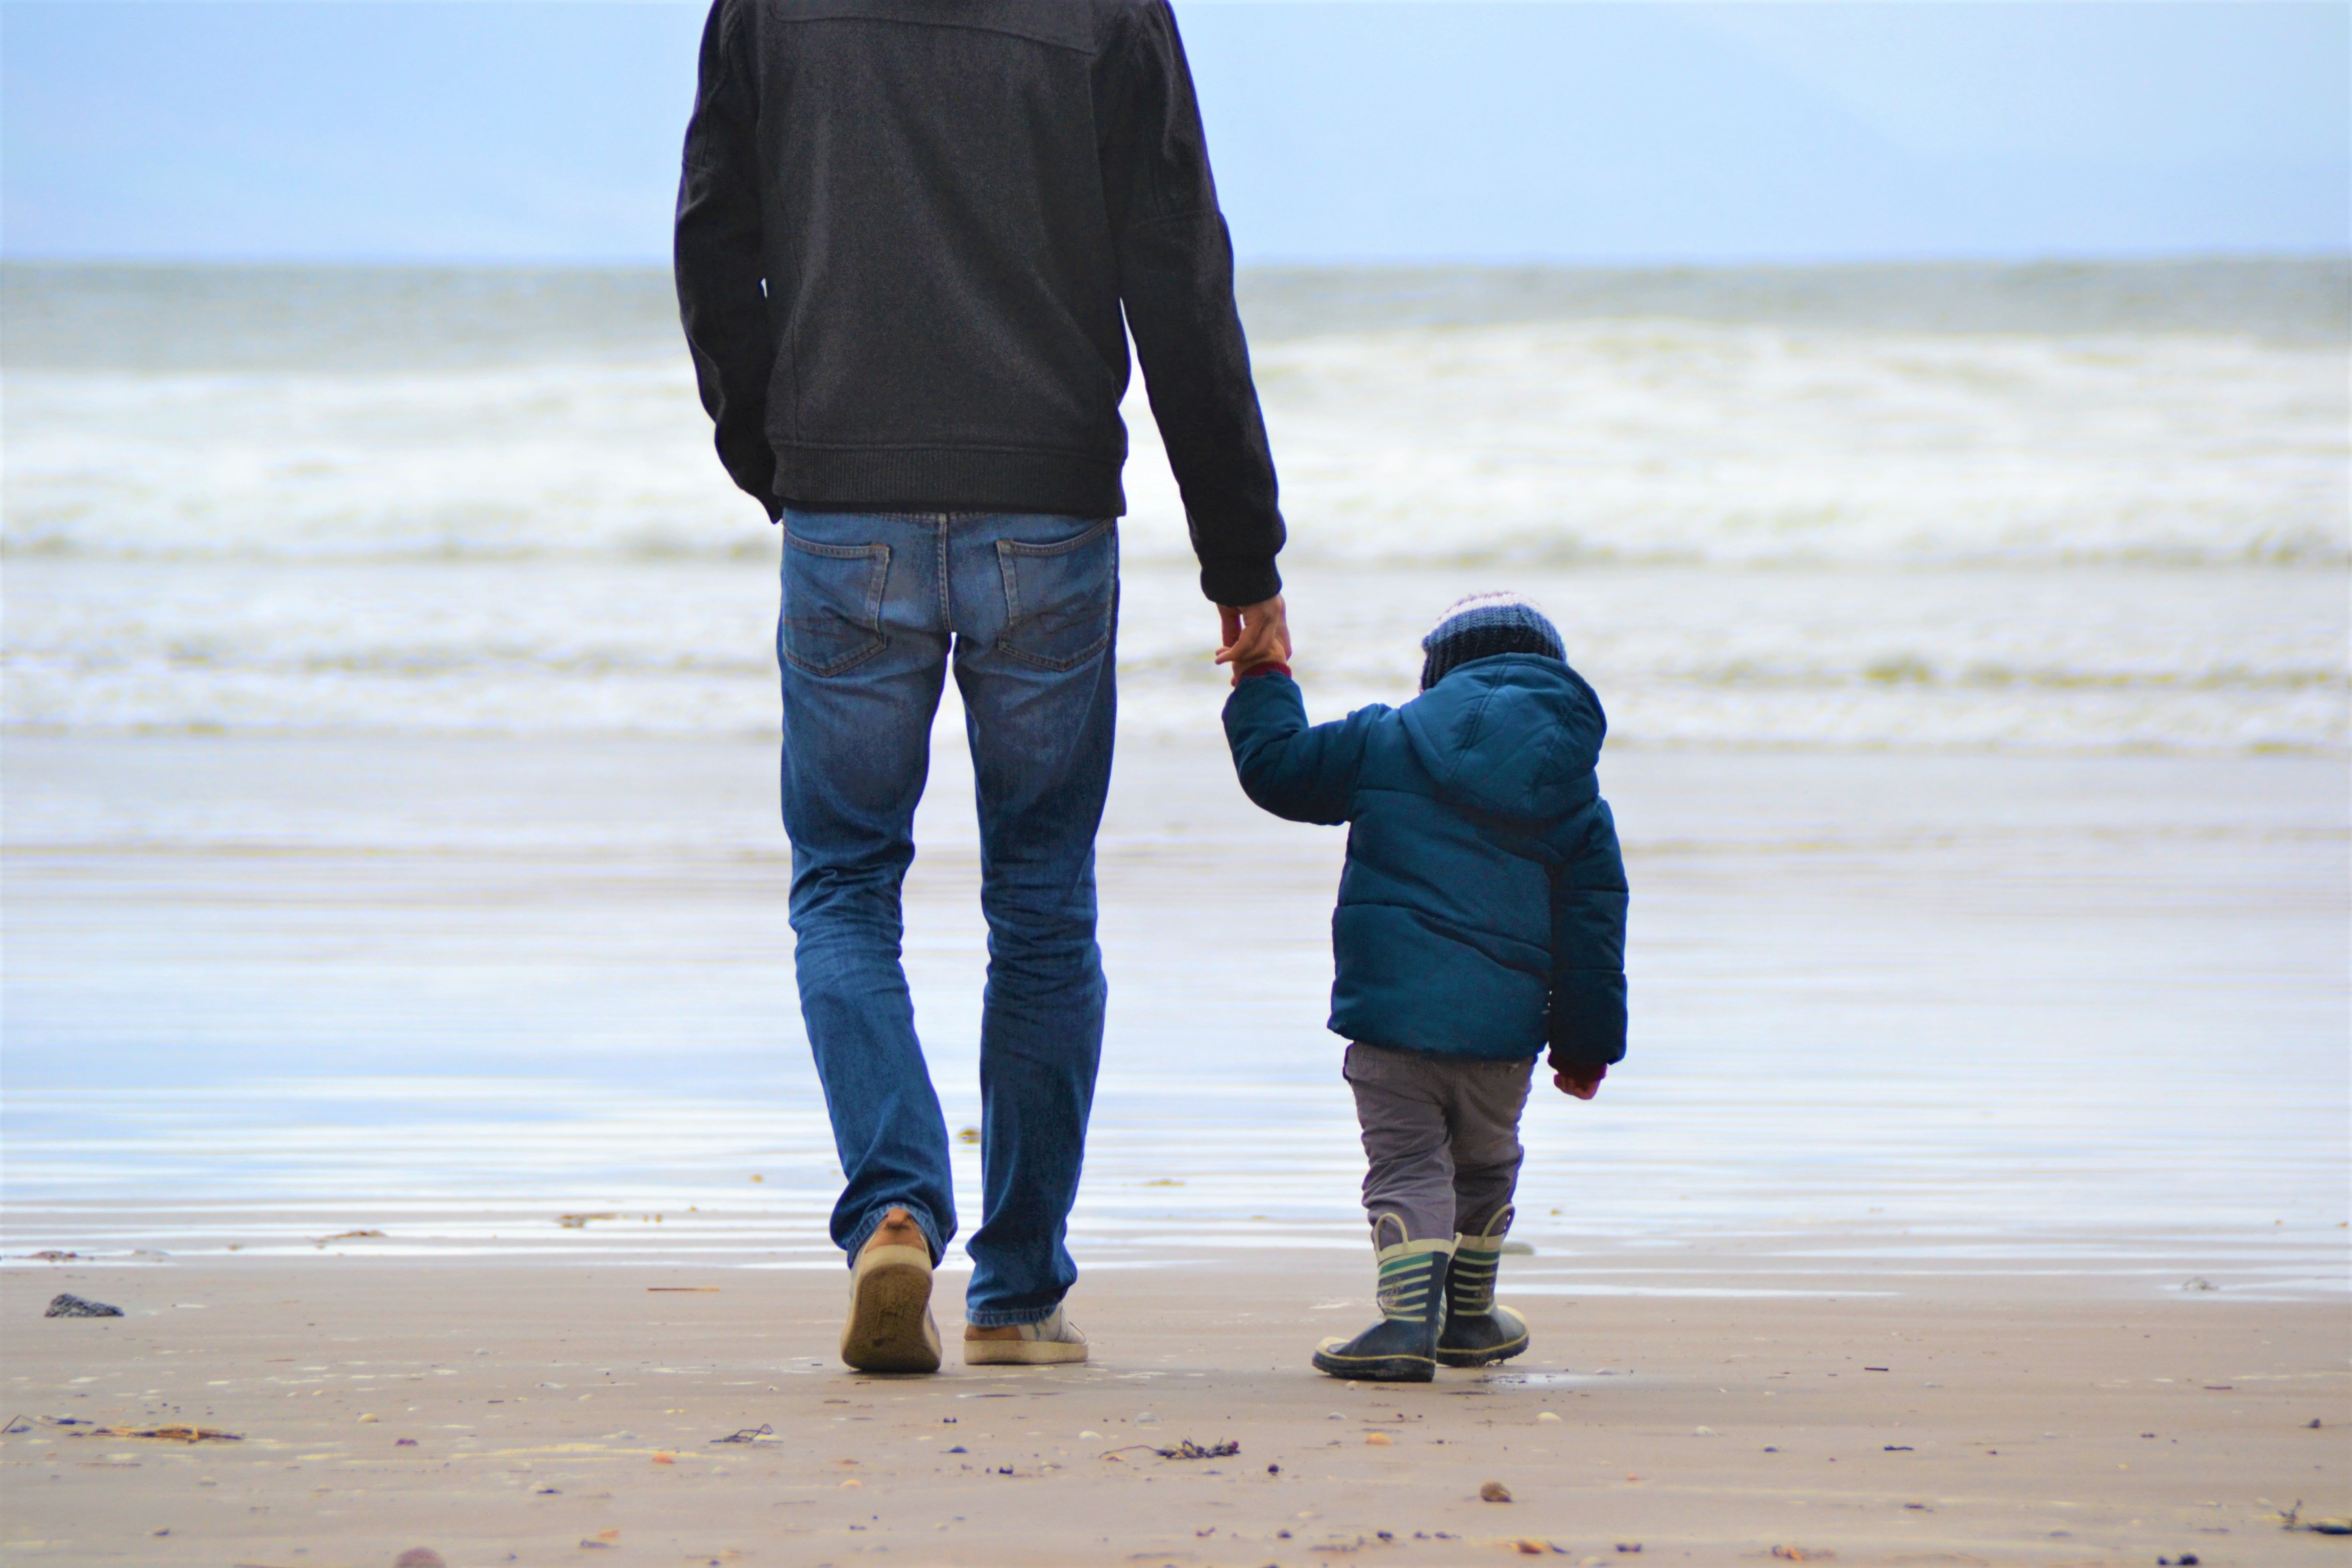 A father and son holding hands | Source: Unsplash